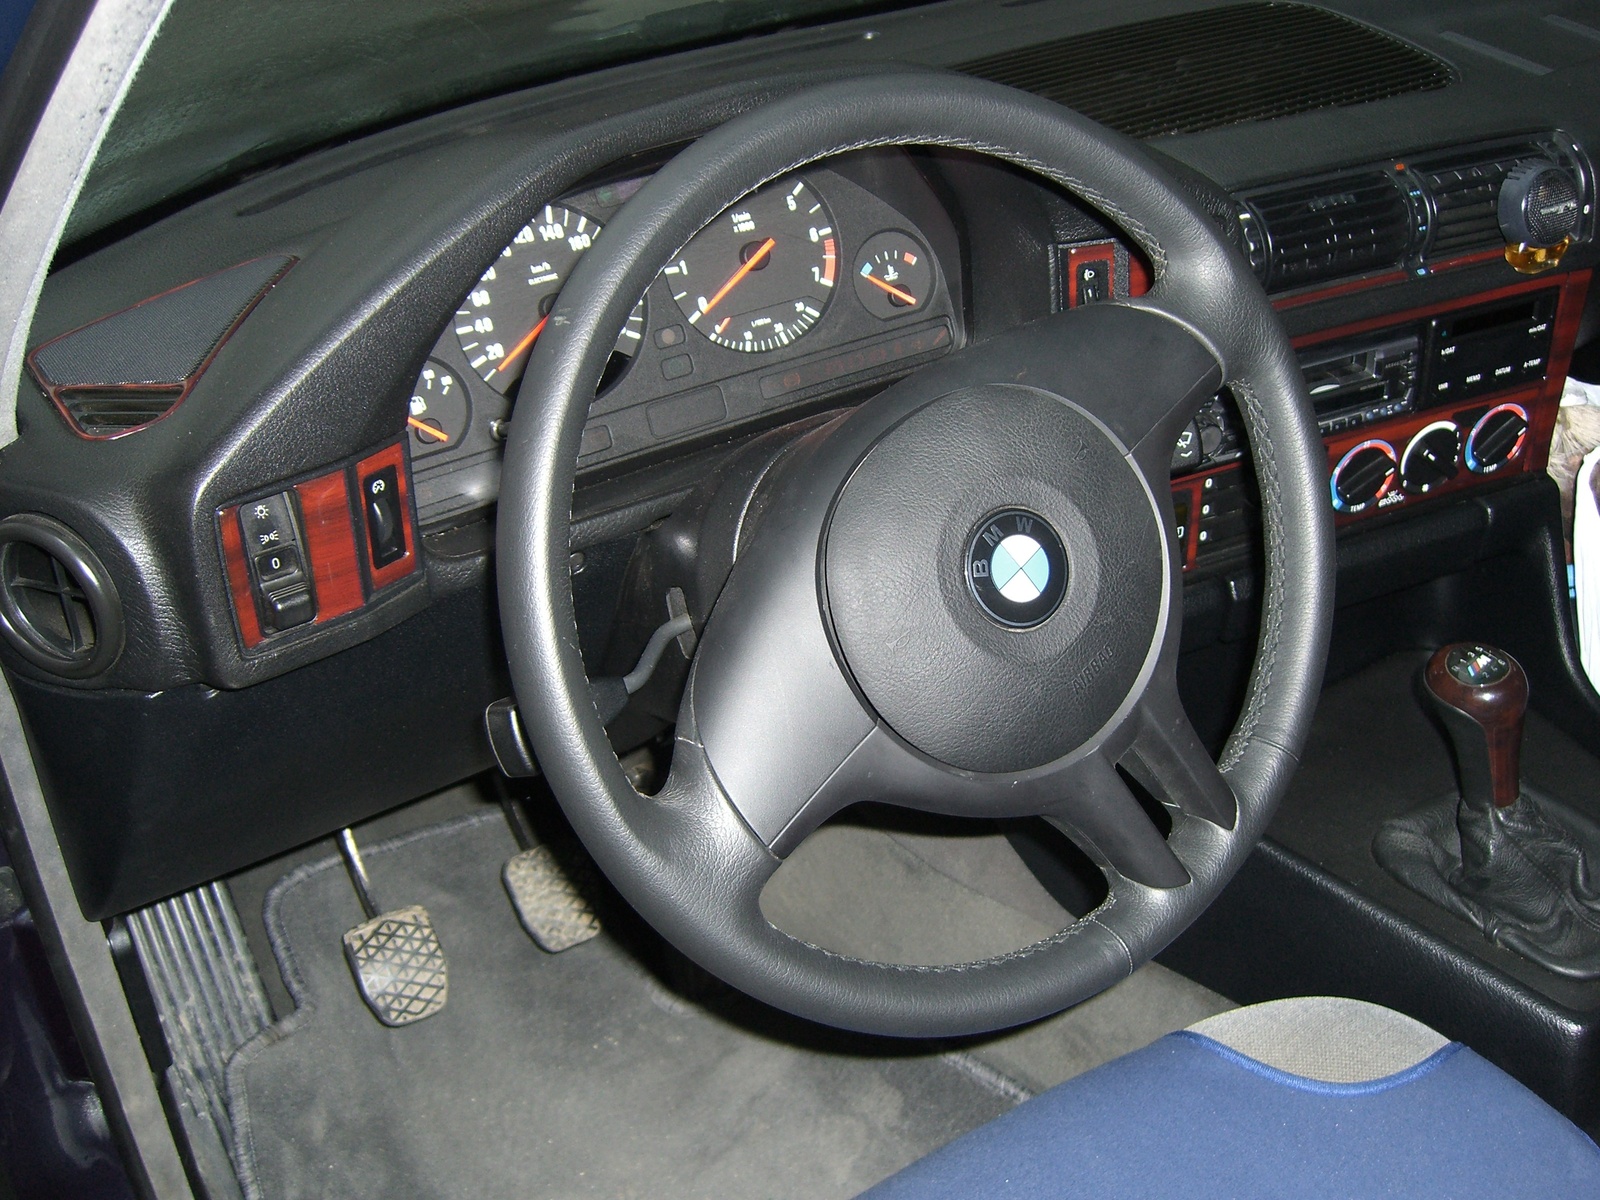 1995 BMW 5 Series 518i - Pictures - 1995 BMW 518 518i picture ...